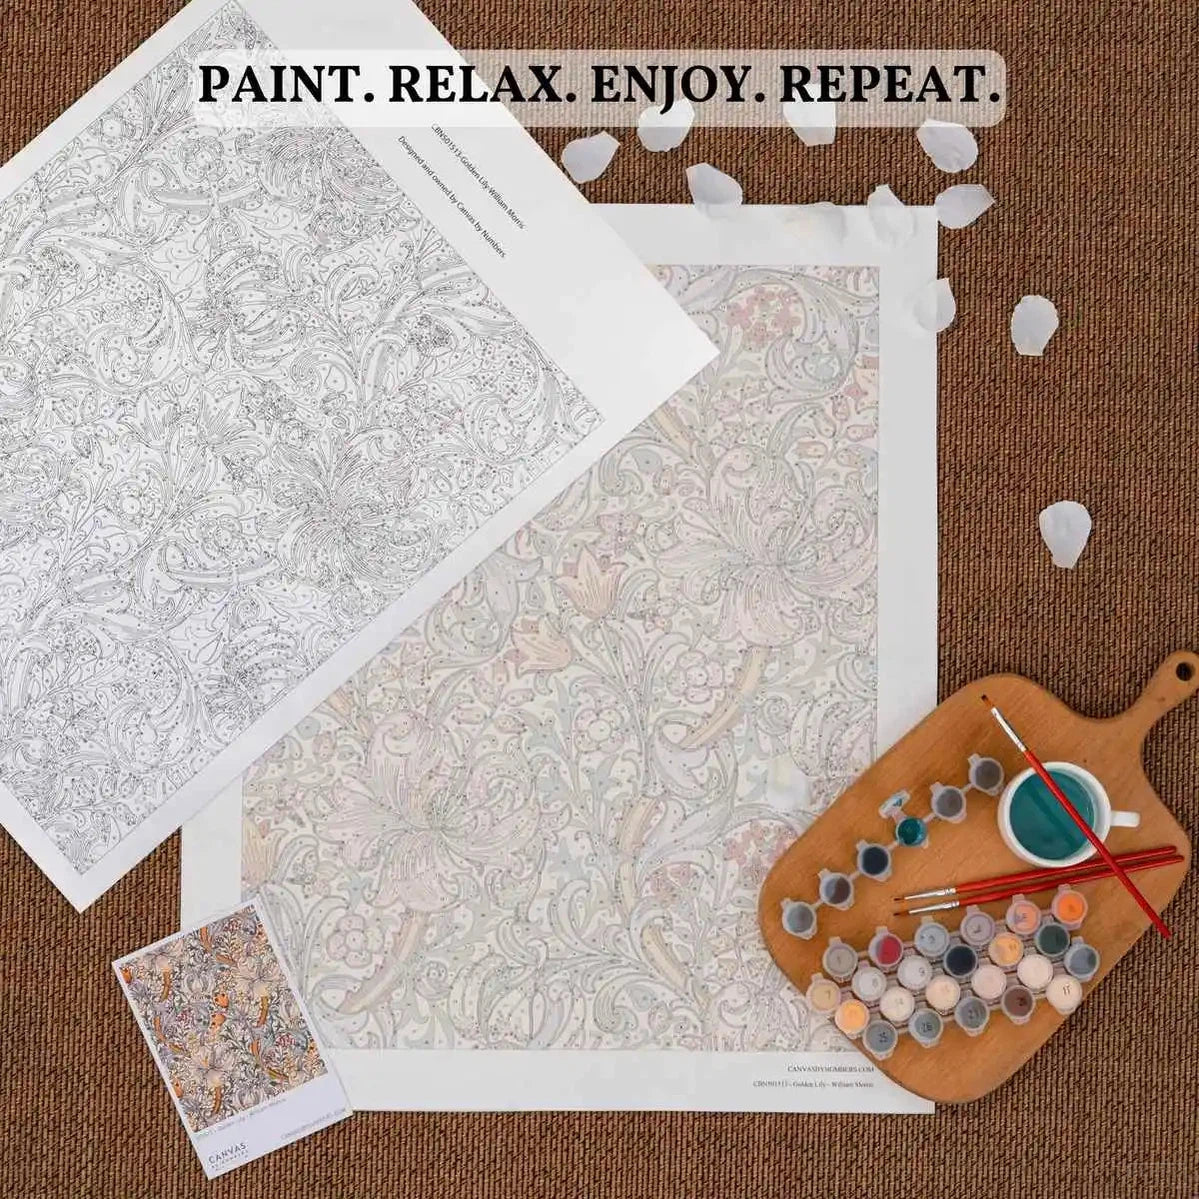 Paint by Numbers Kit for Adults